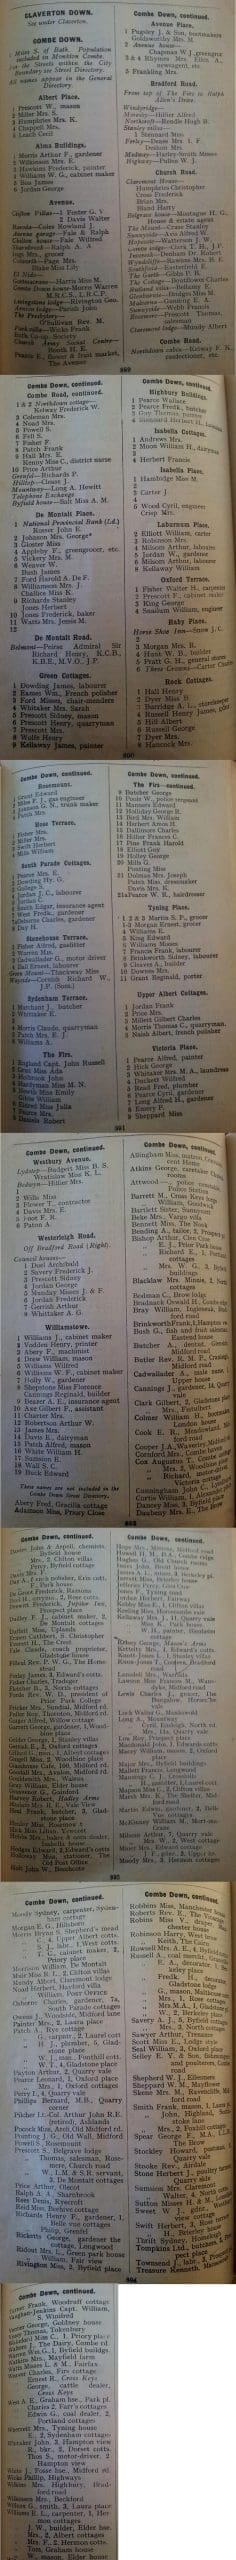 1940 Post Office Directory for Combe Down